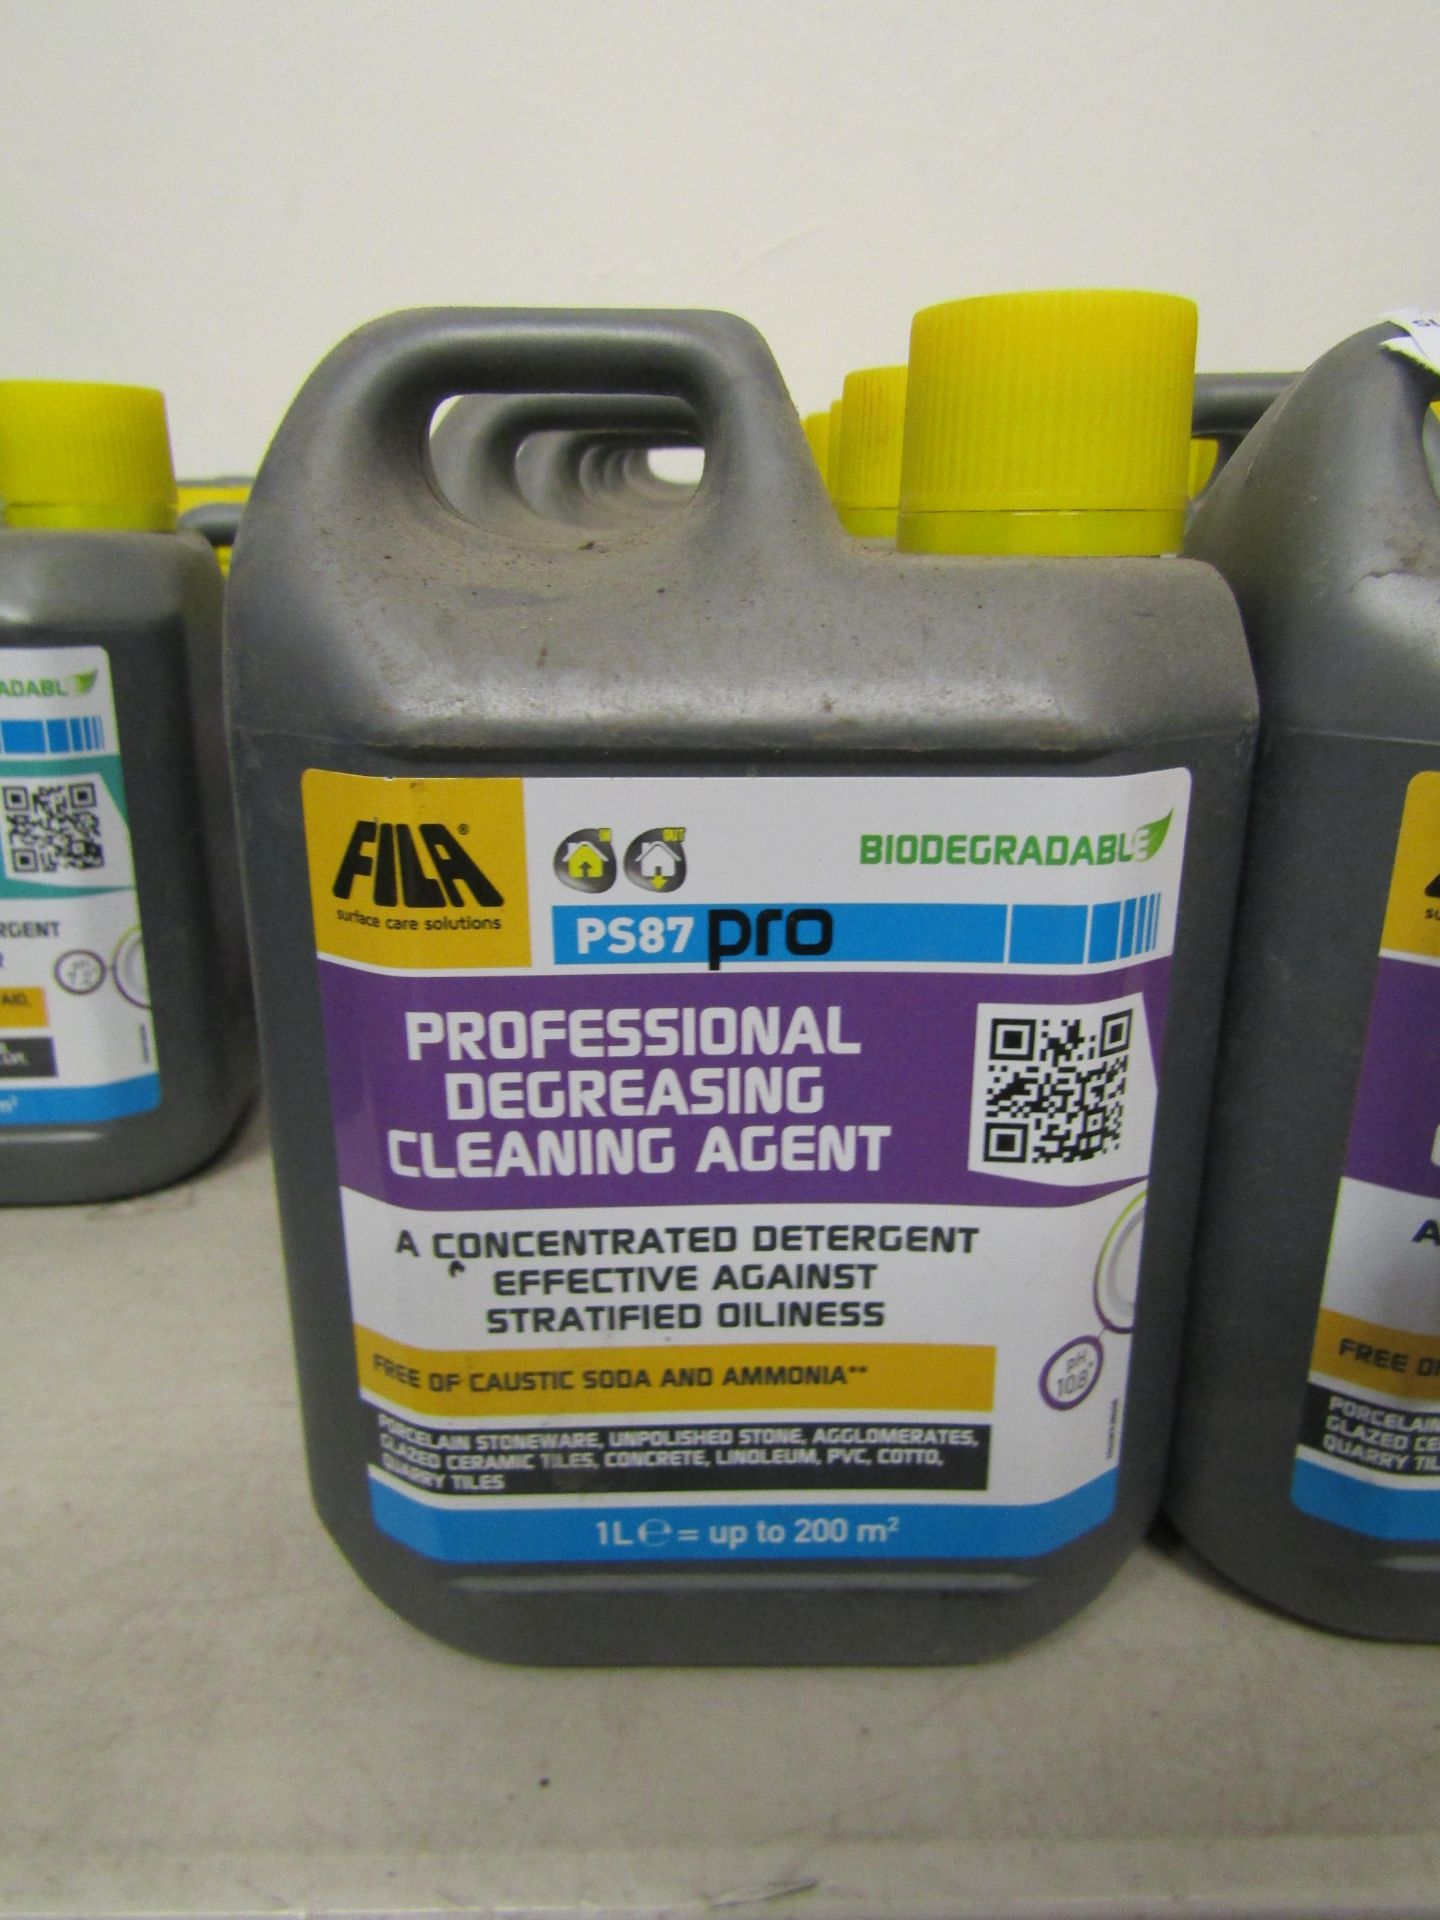 2x Fila 1L - Up To 200m PS87 Pro Professional Degreasing Cleaning Agent, A Concentrated Detergent